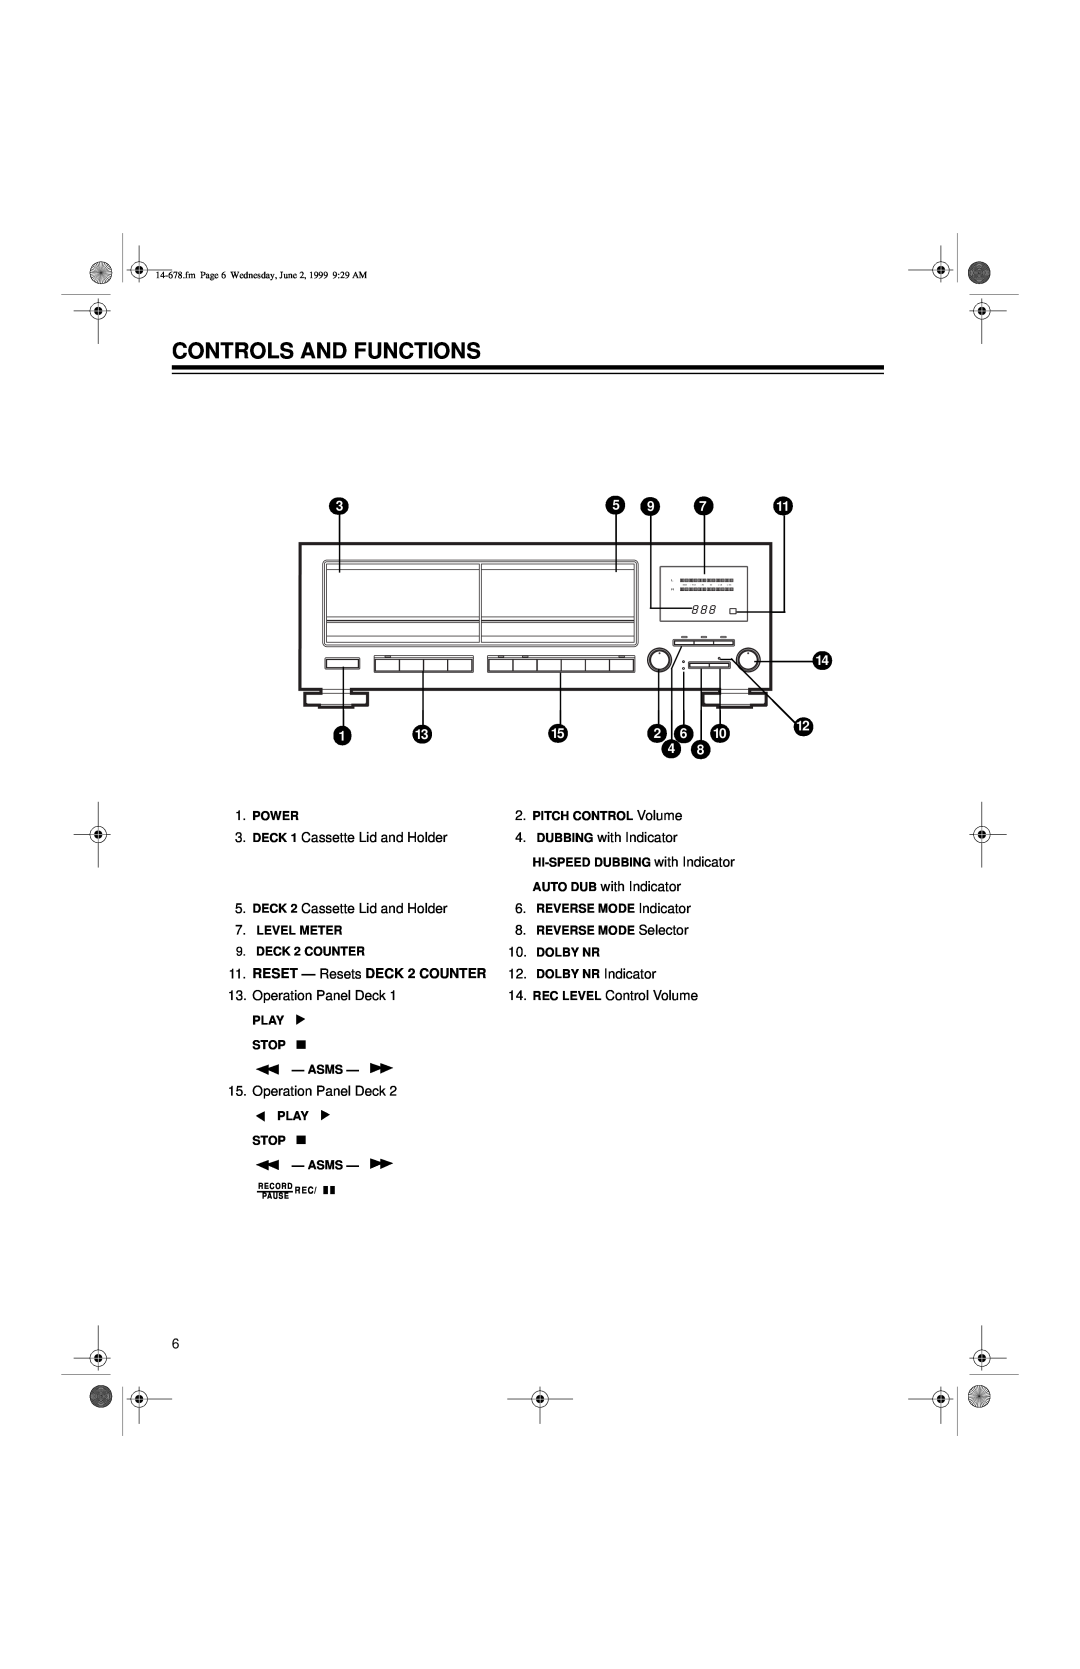 Optimus - Katadyn Products Inc SCT-540 owner manual Controls And Functions, RESET - Resets DECK 2 COUNTER 